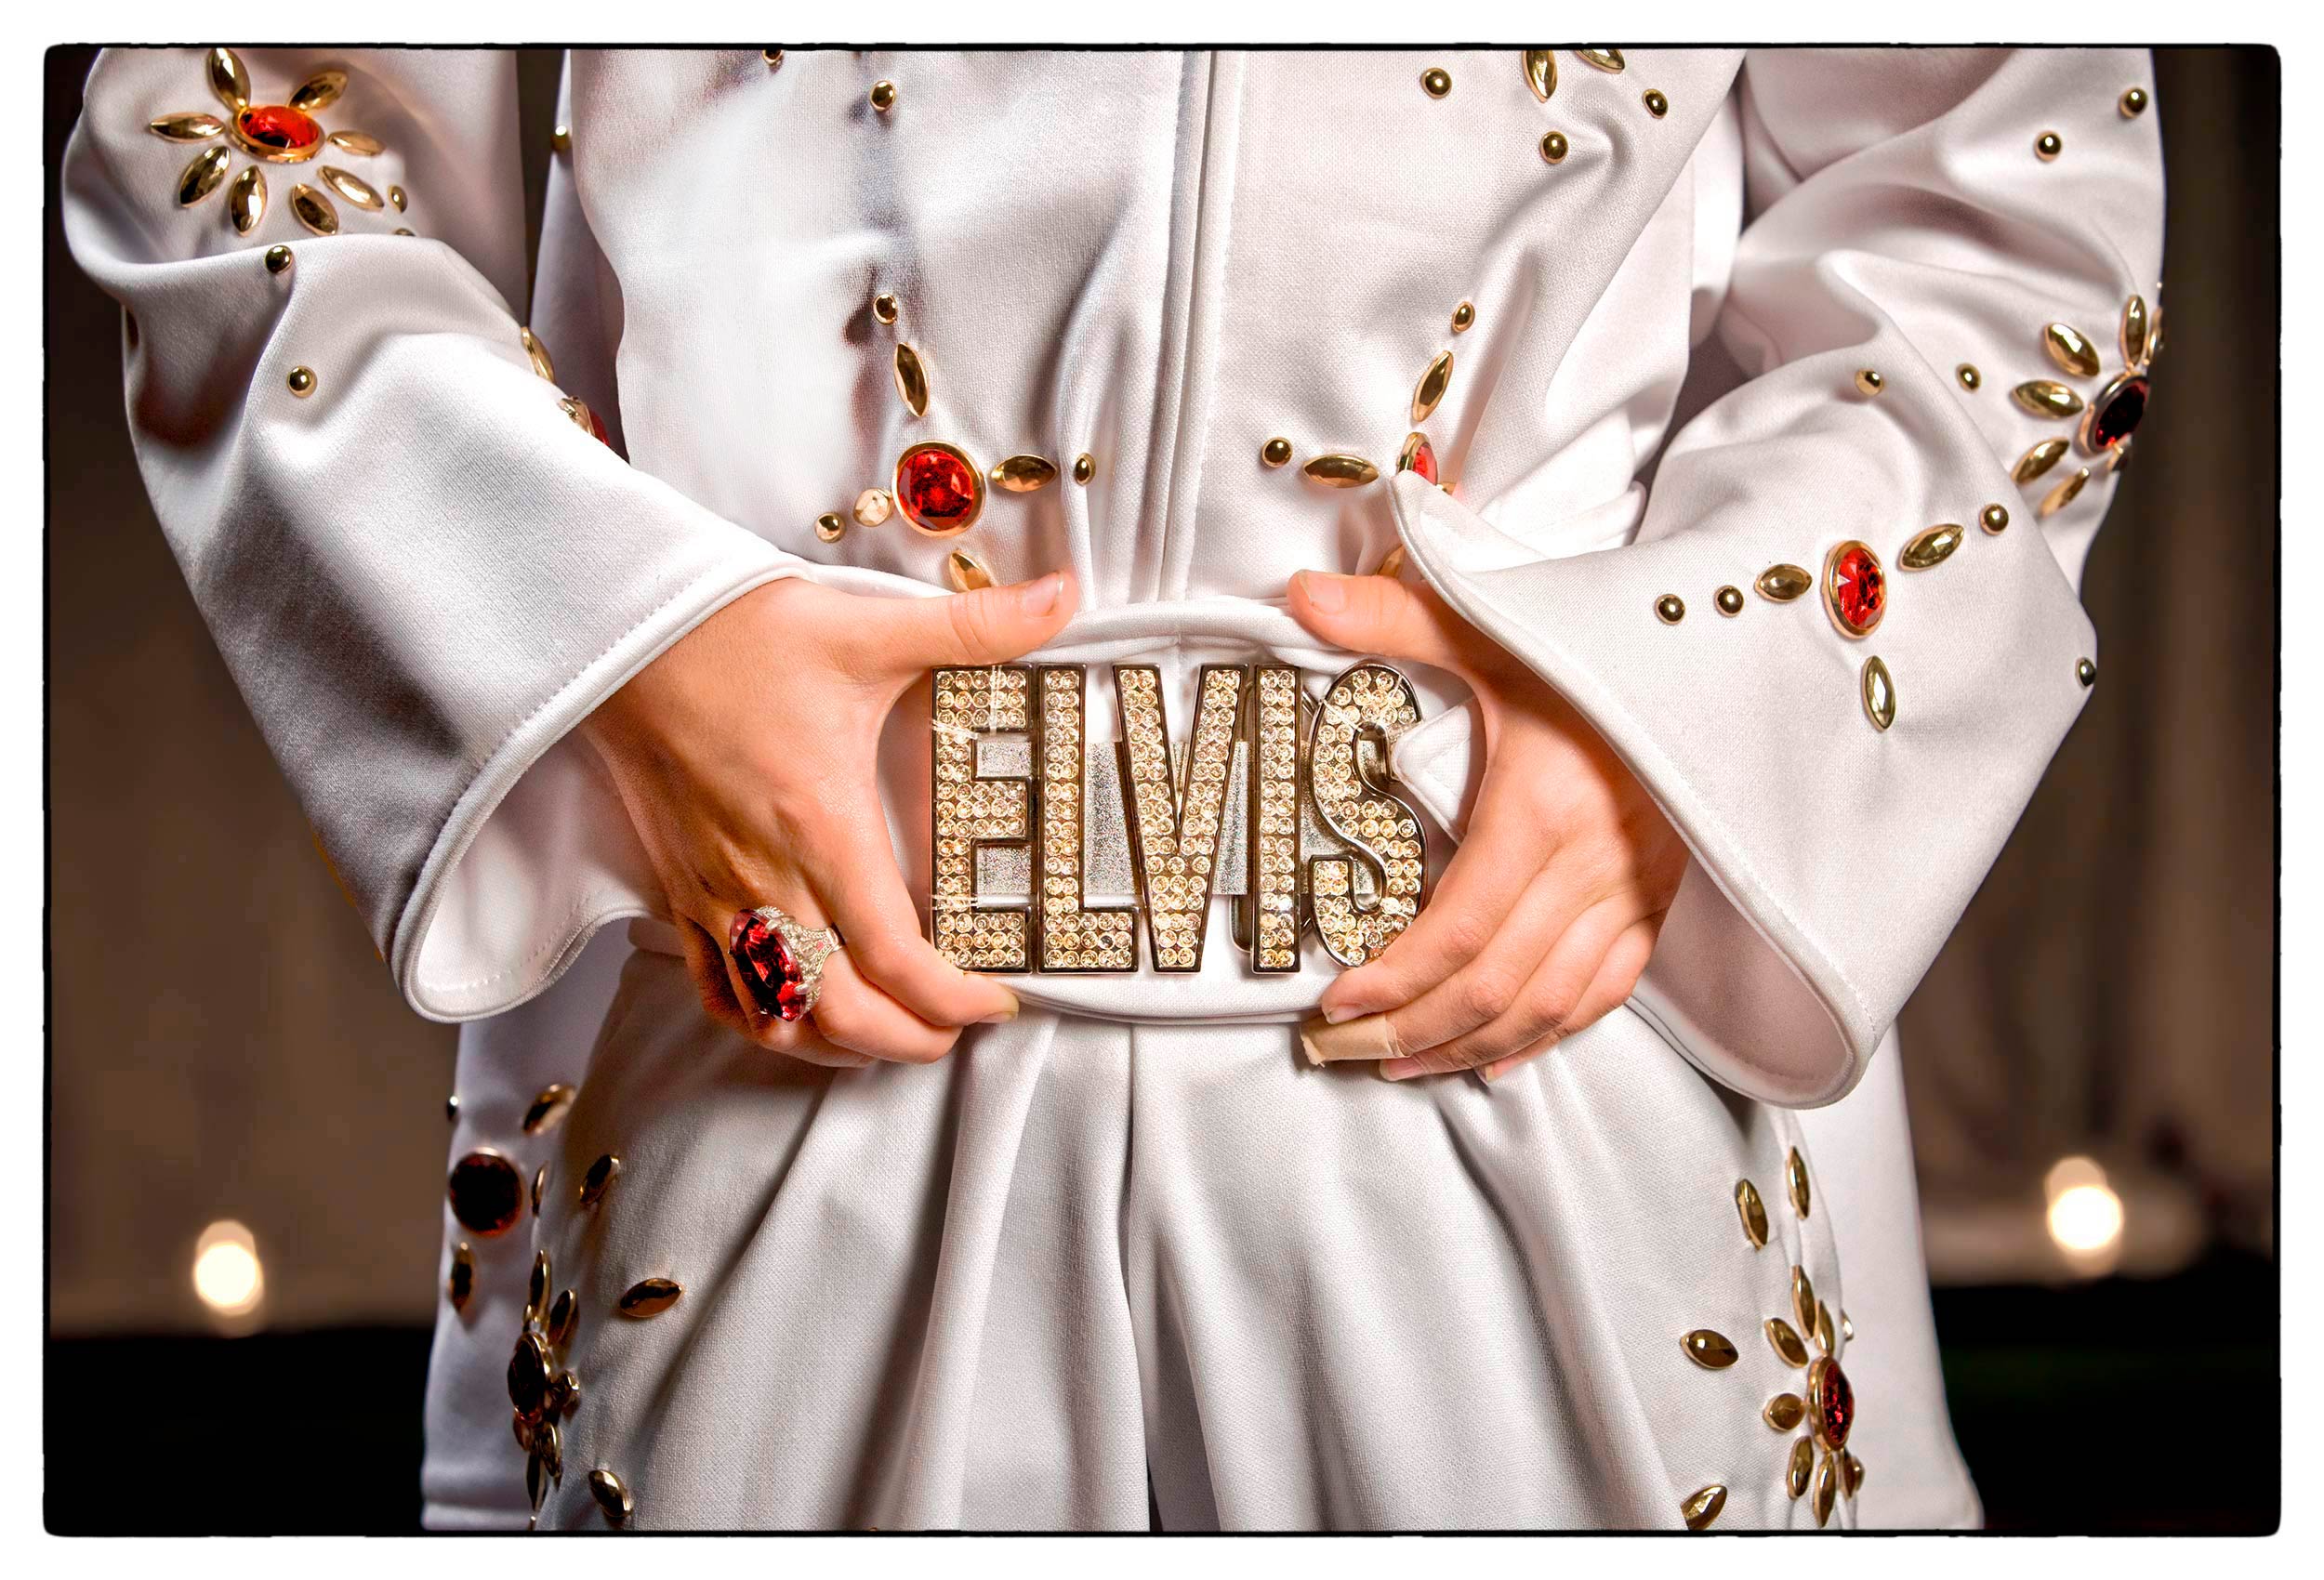 a-young-boy-dressed-as-elvis-presley-shows-off-his-large-silver-elvis-belt-buckle-at-a-celebrity-look-a-like-convention-in-las-vegas